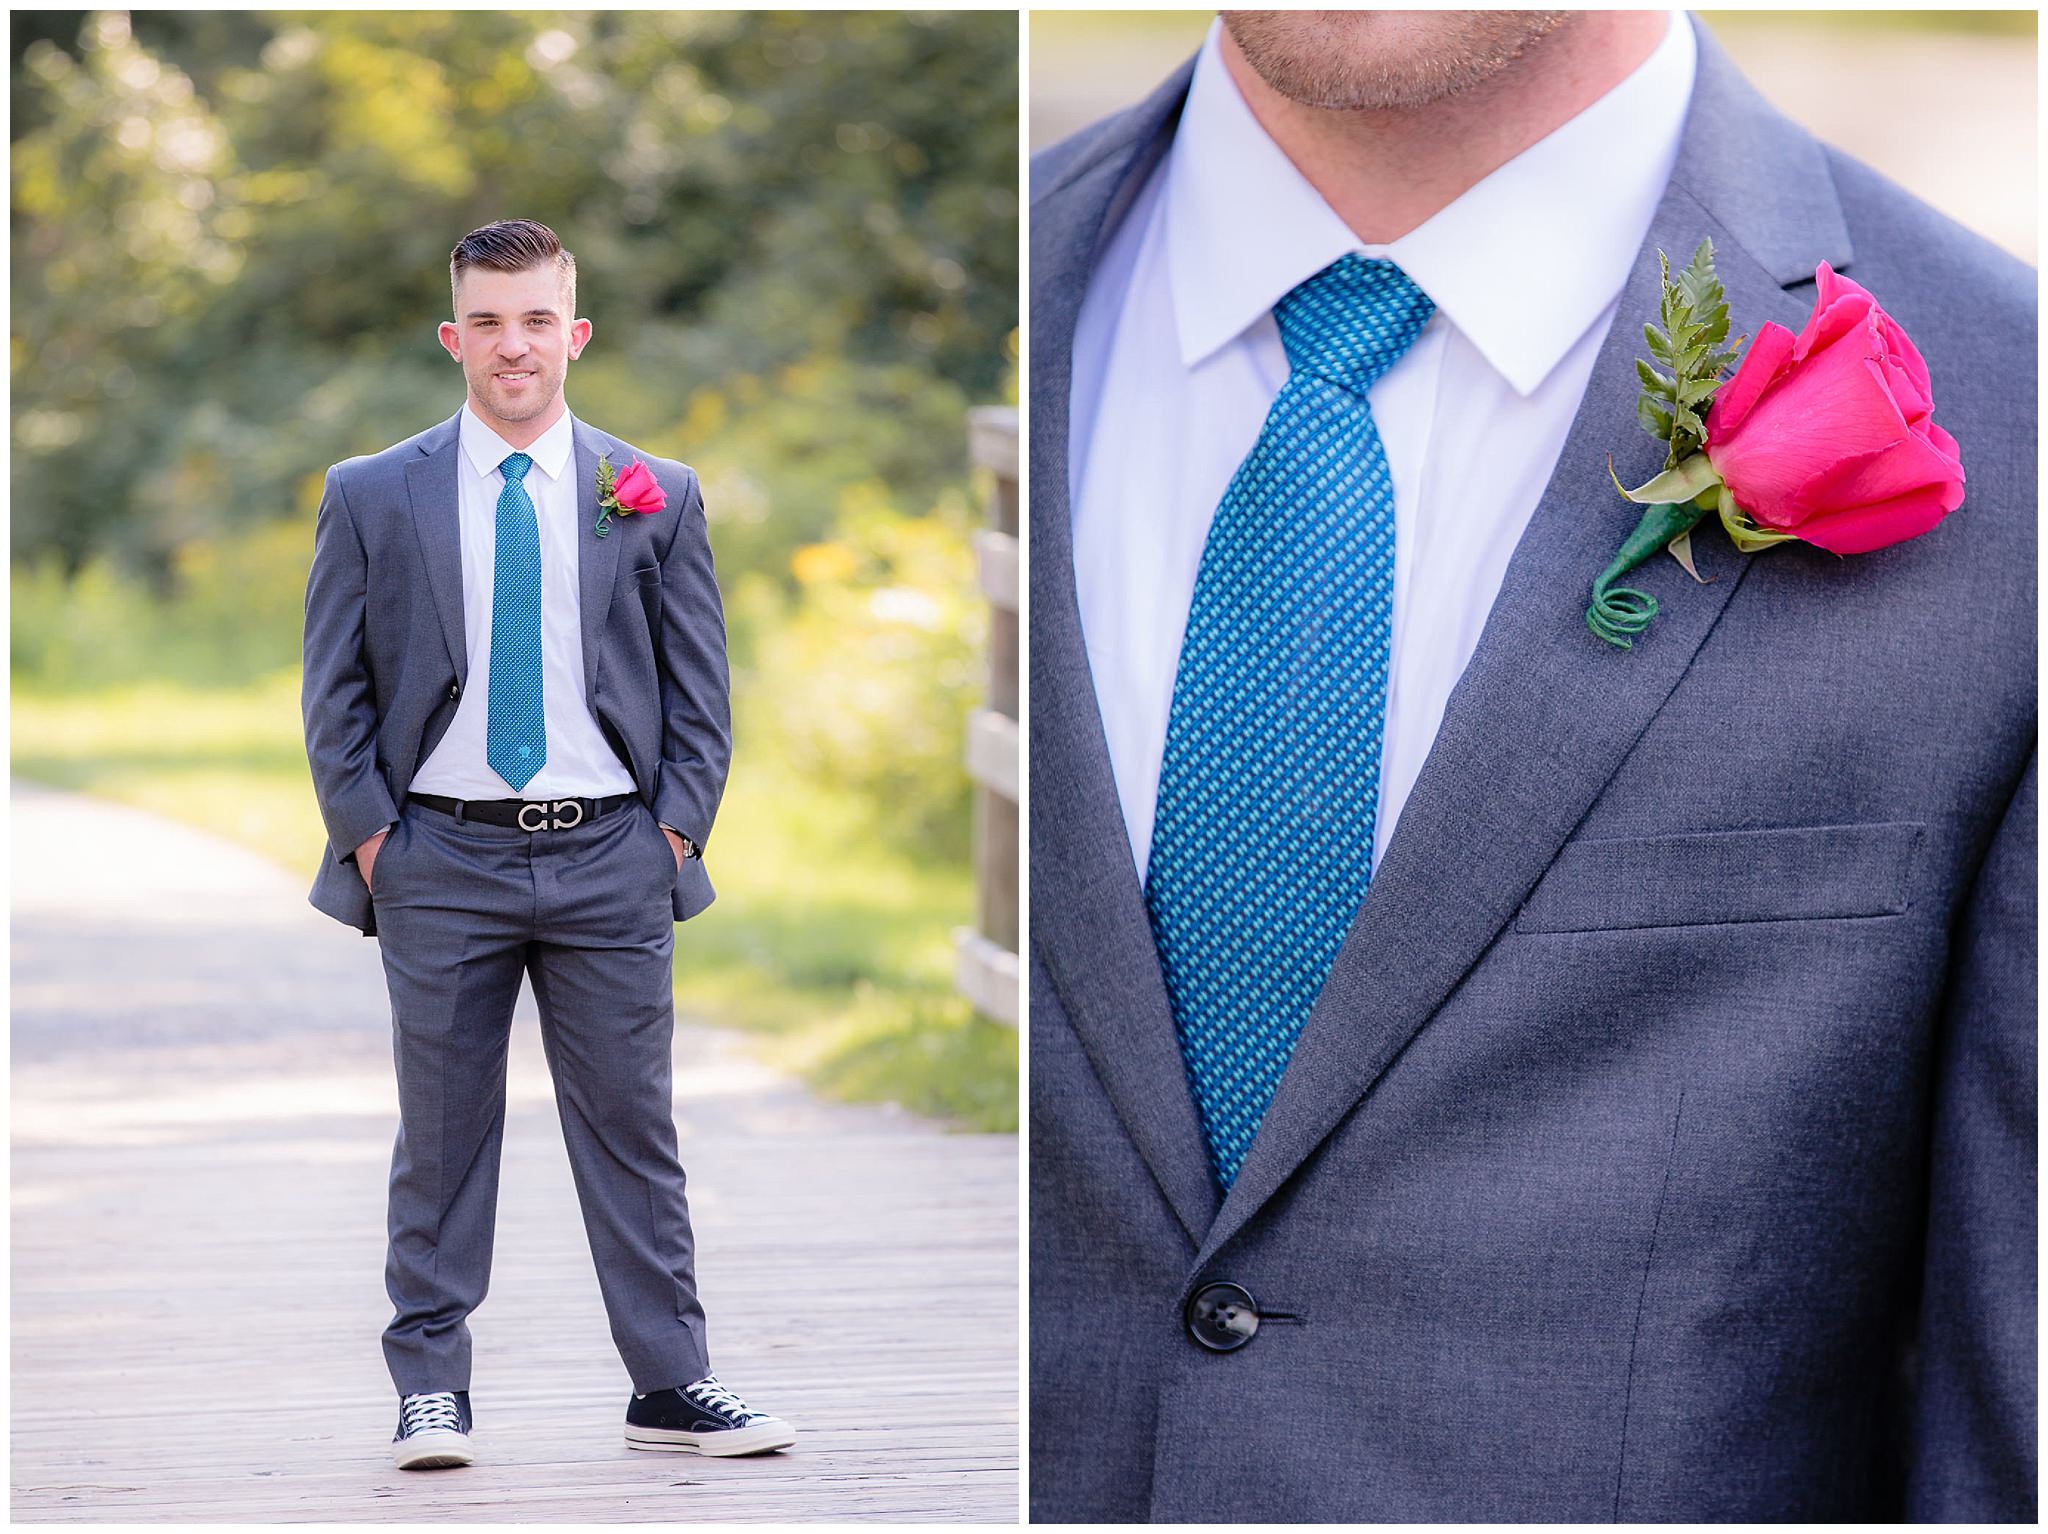 Groom portrait and closeup of boutonniere